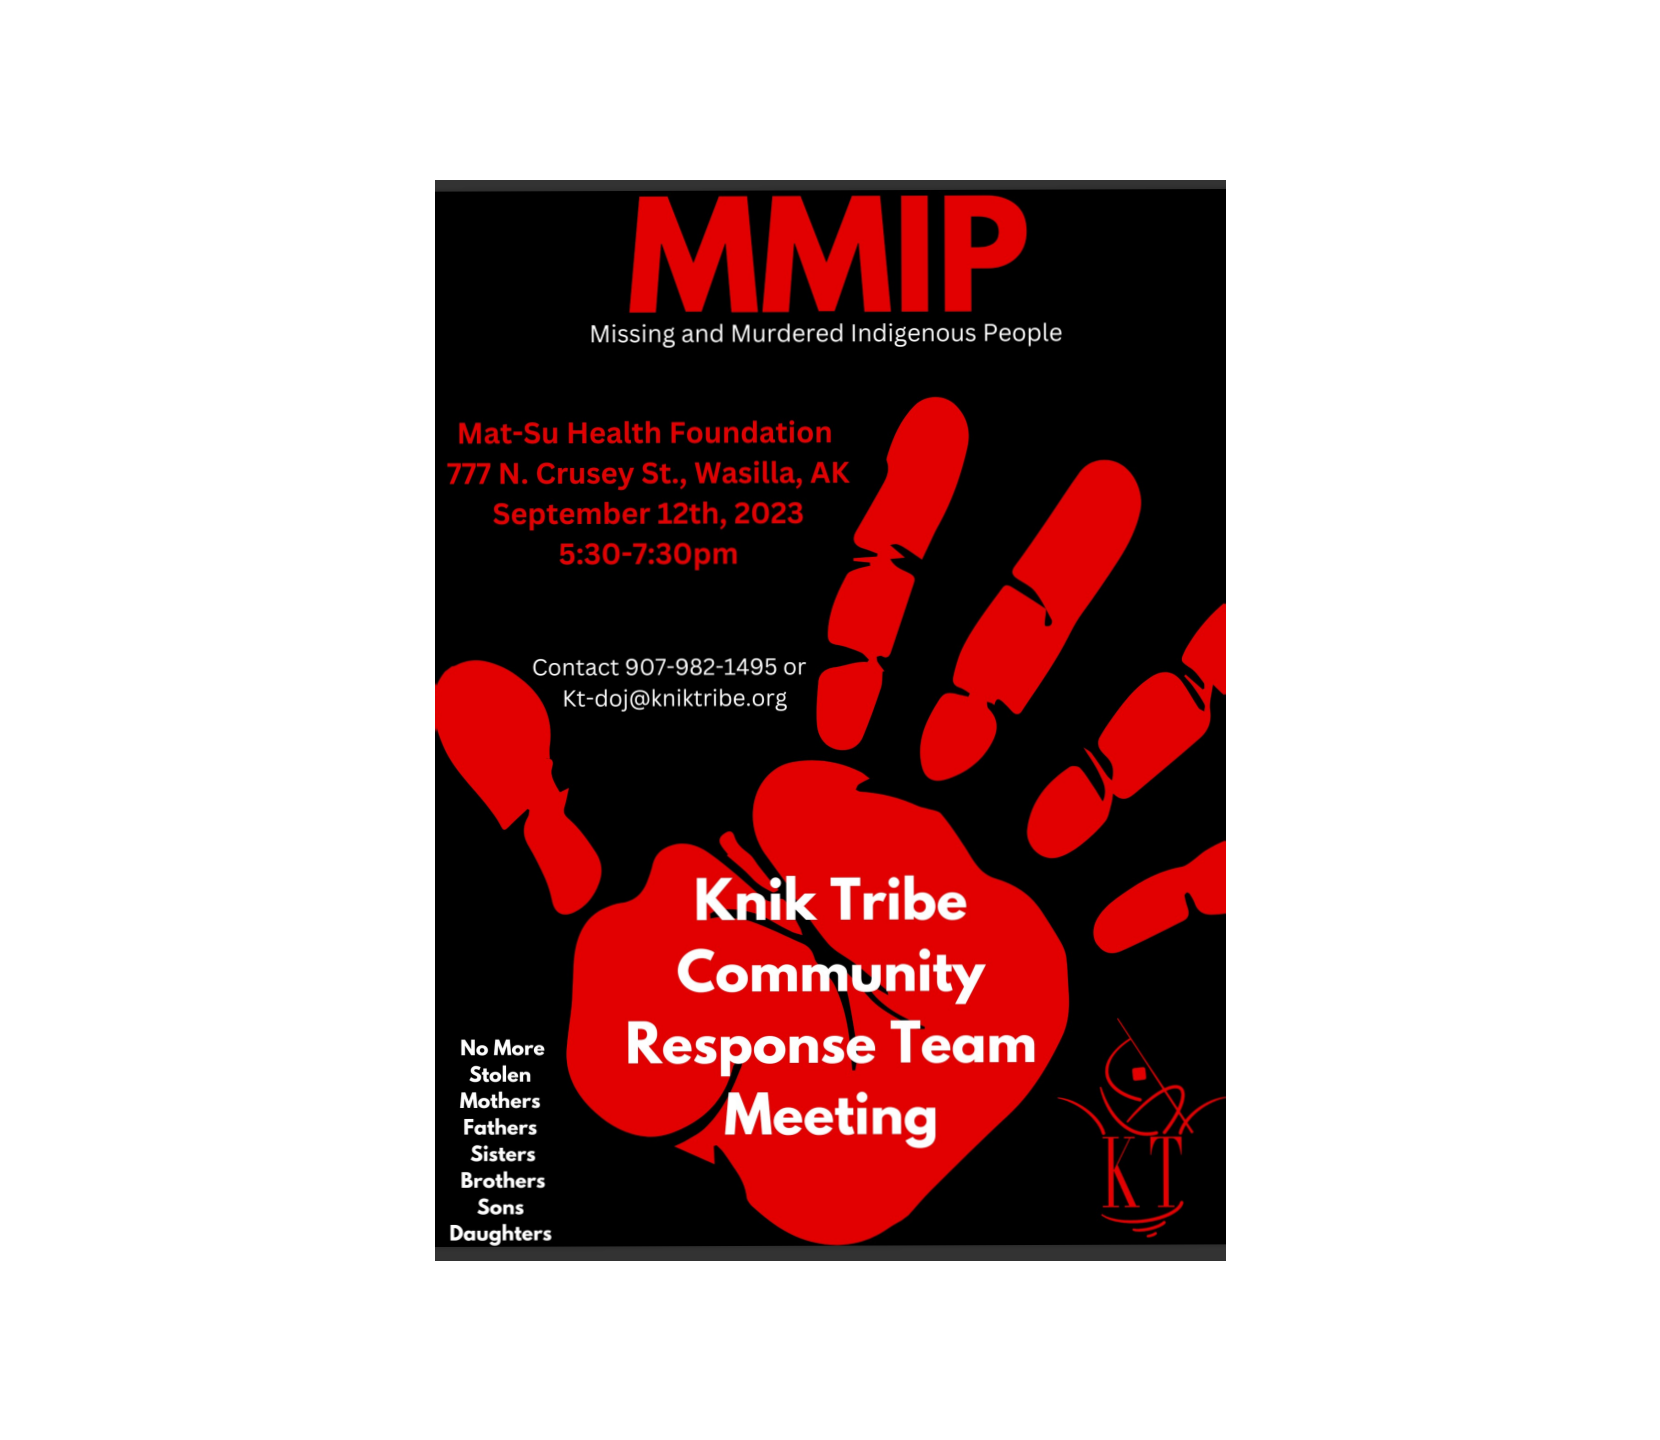 Flyer for missing and murdered indigenous people meeting held by Knik Tribe response team.